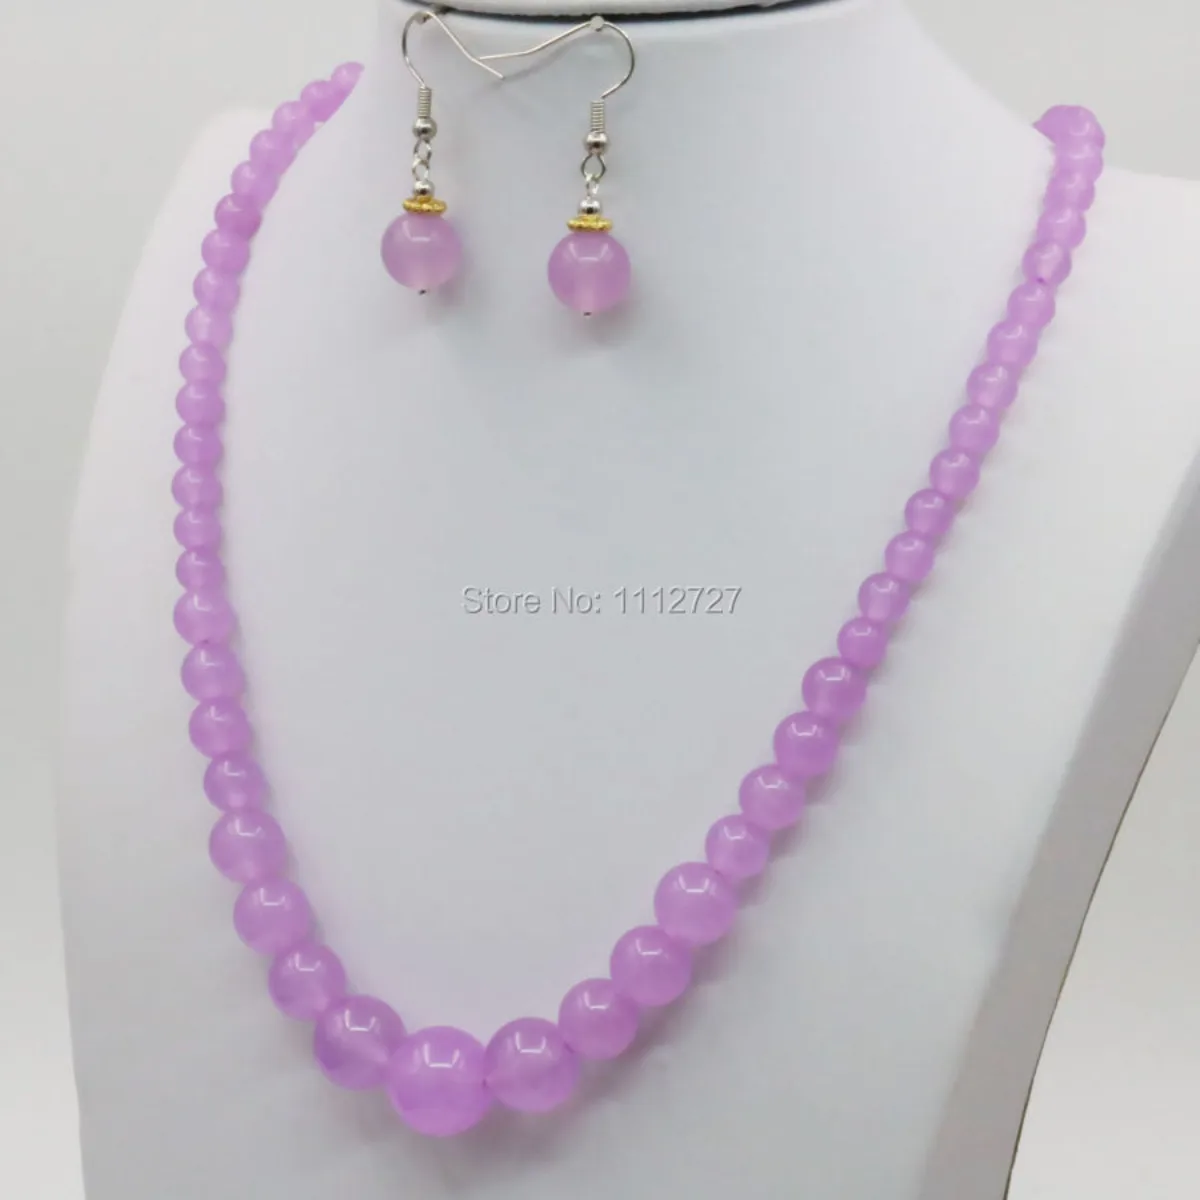 

6-14mm Round Purple Chalcedony Crystal Natural Stone Tower Necklace Chain Earring Sets 18inch Bead Women Jewelry Gifts Accessory